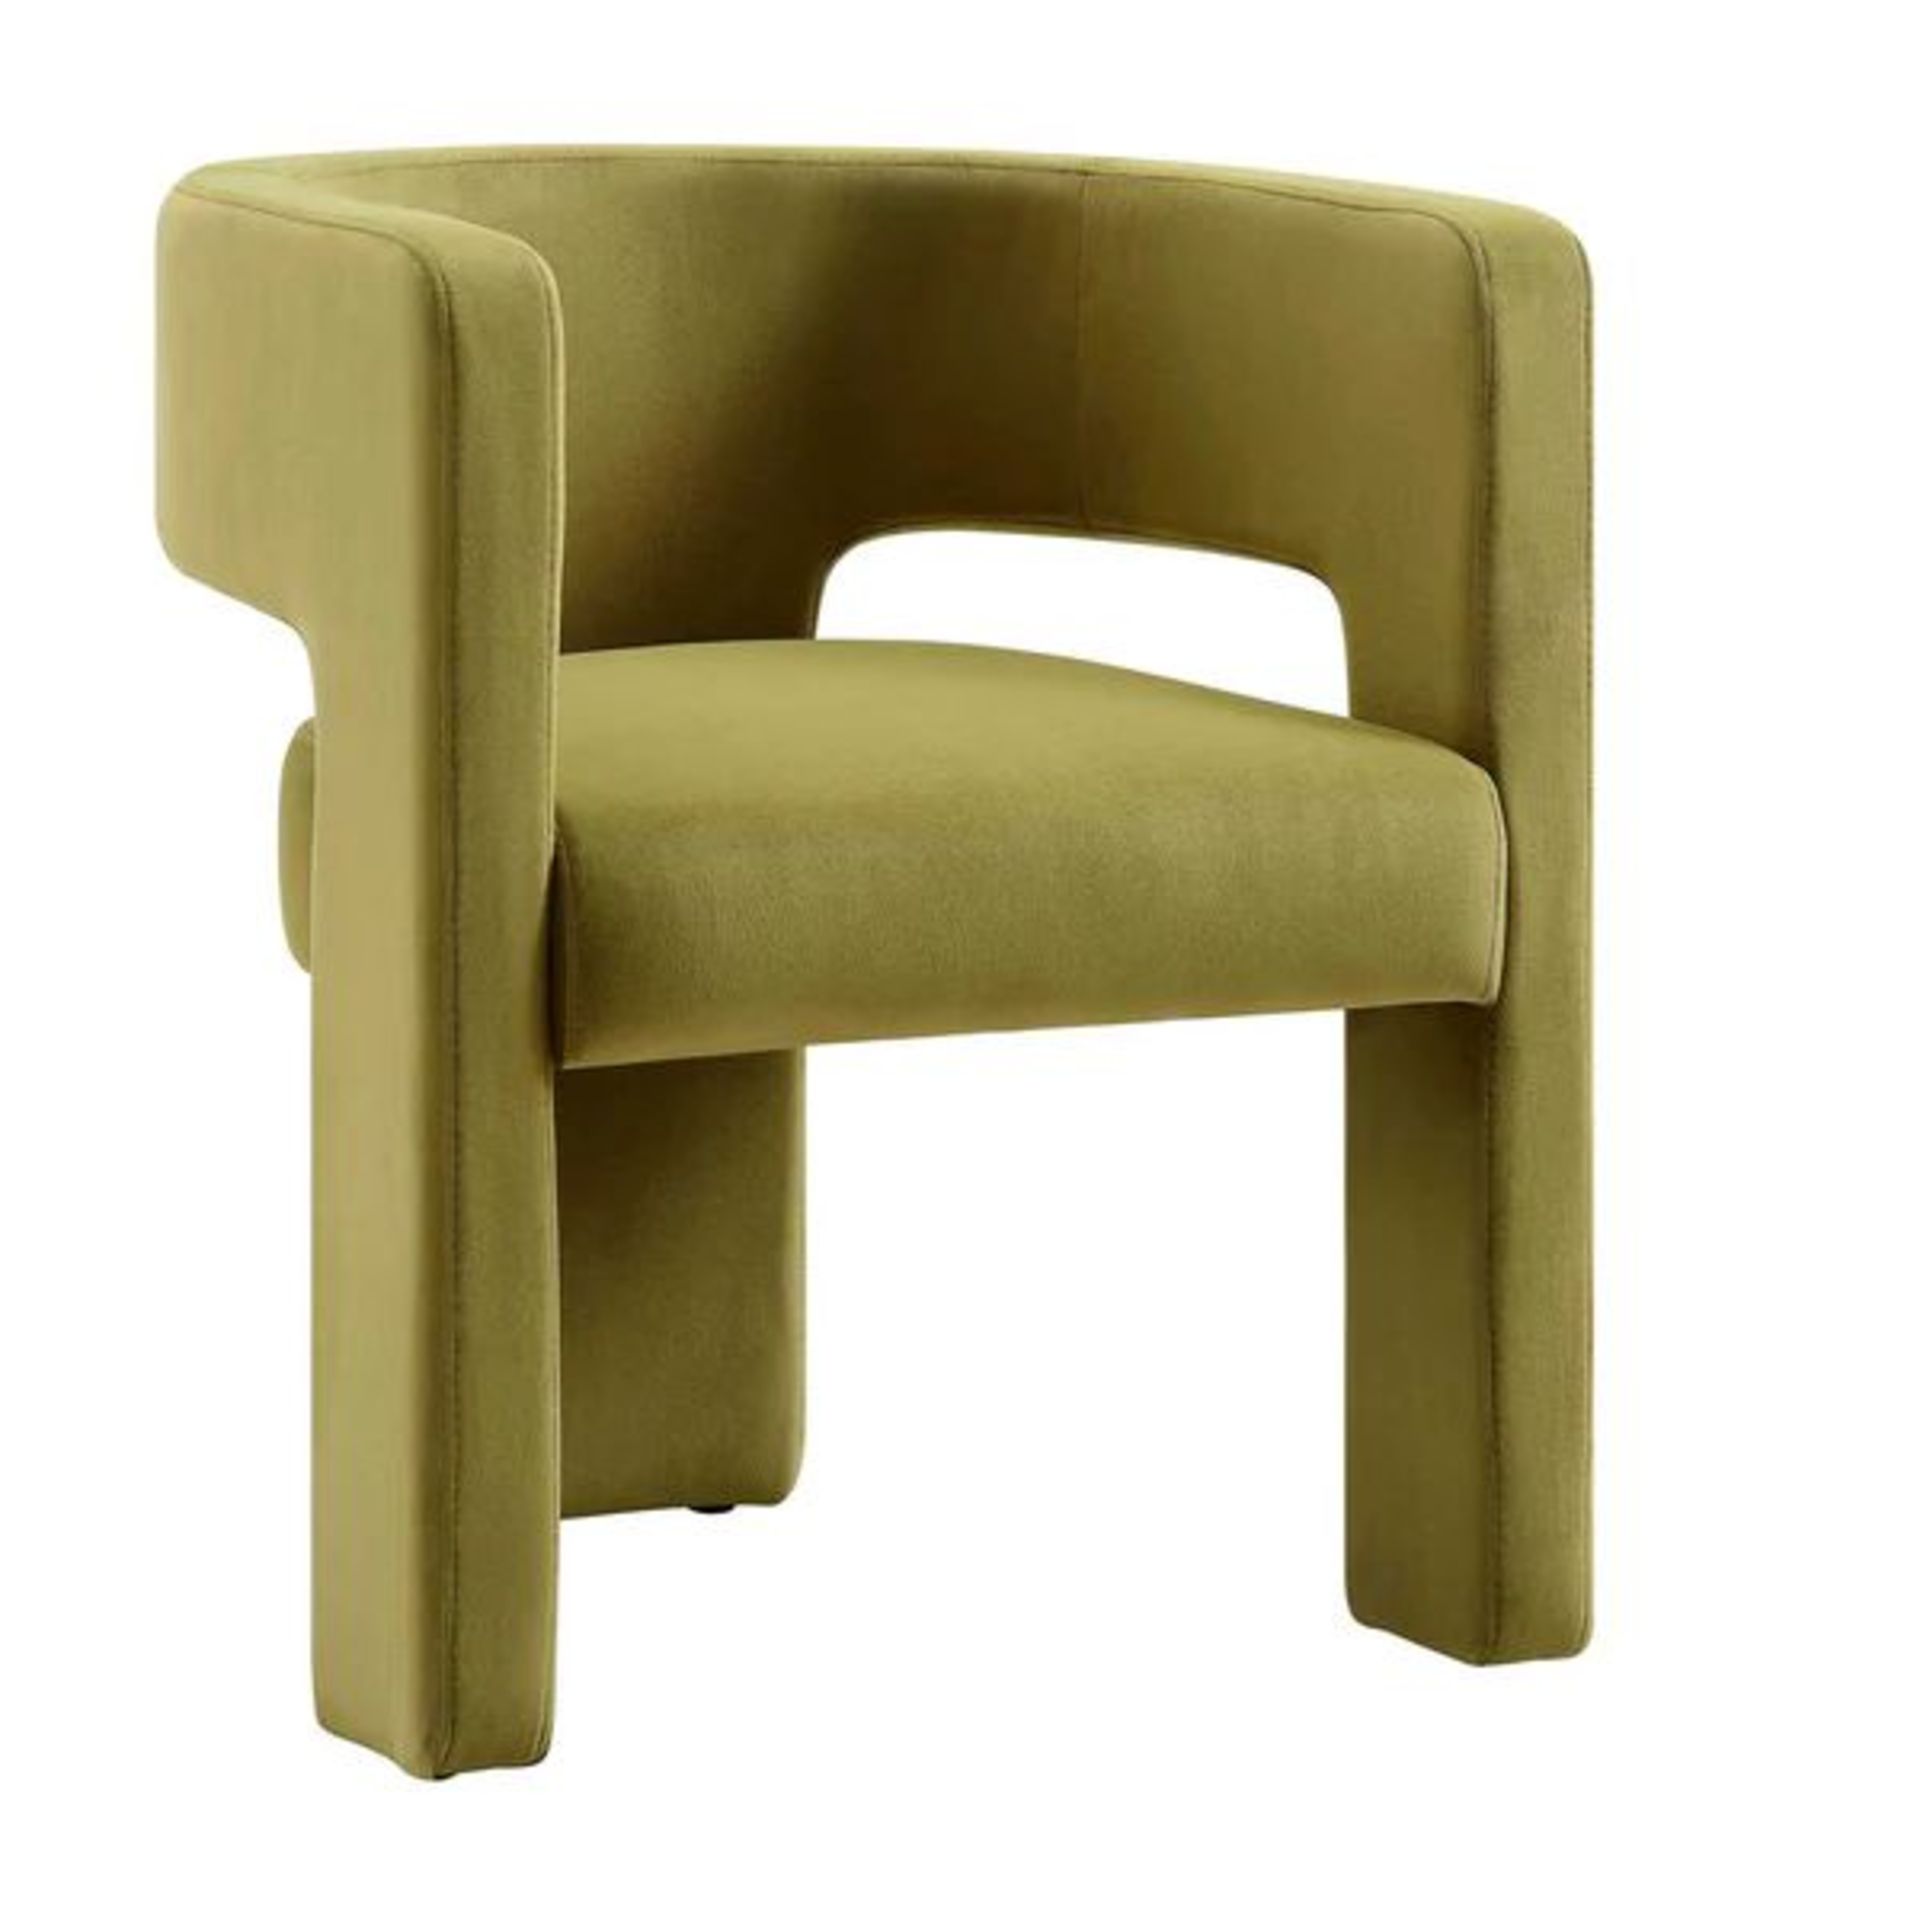 Greenwich Olive Green Velvet Dining Chair. - BI. RRP £219.99. Our beautiful Greenwich chair features - Image 2 of 2